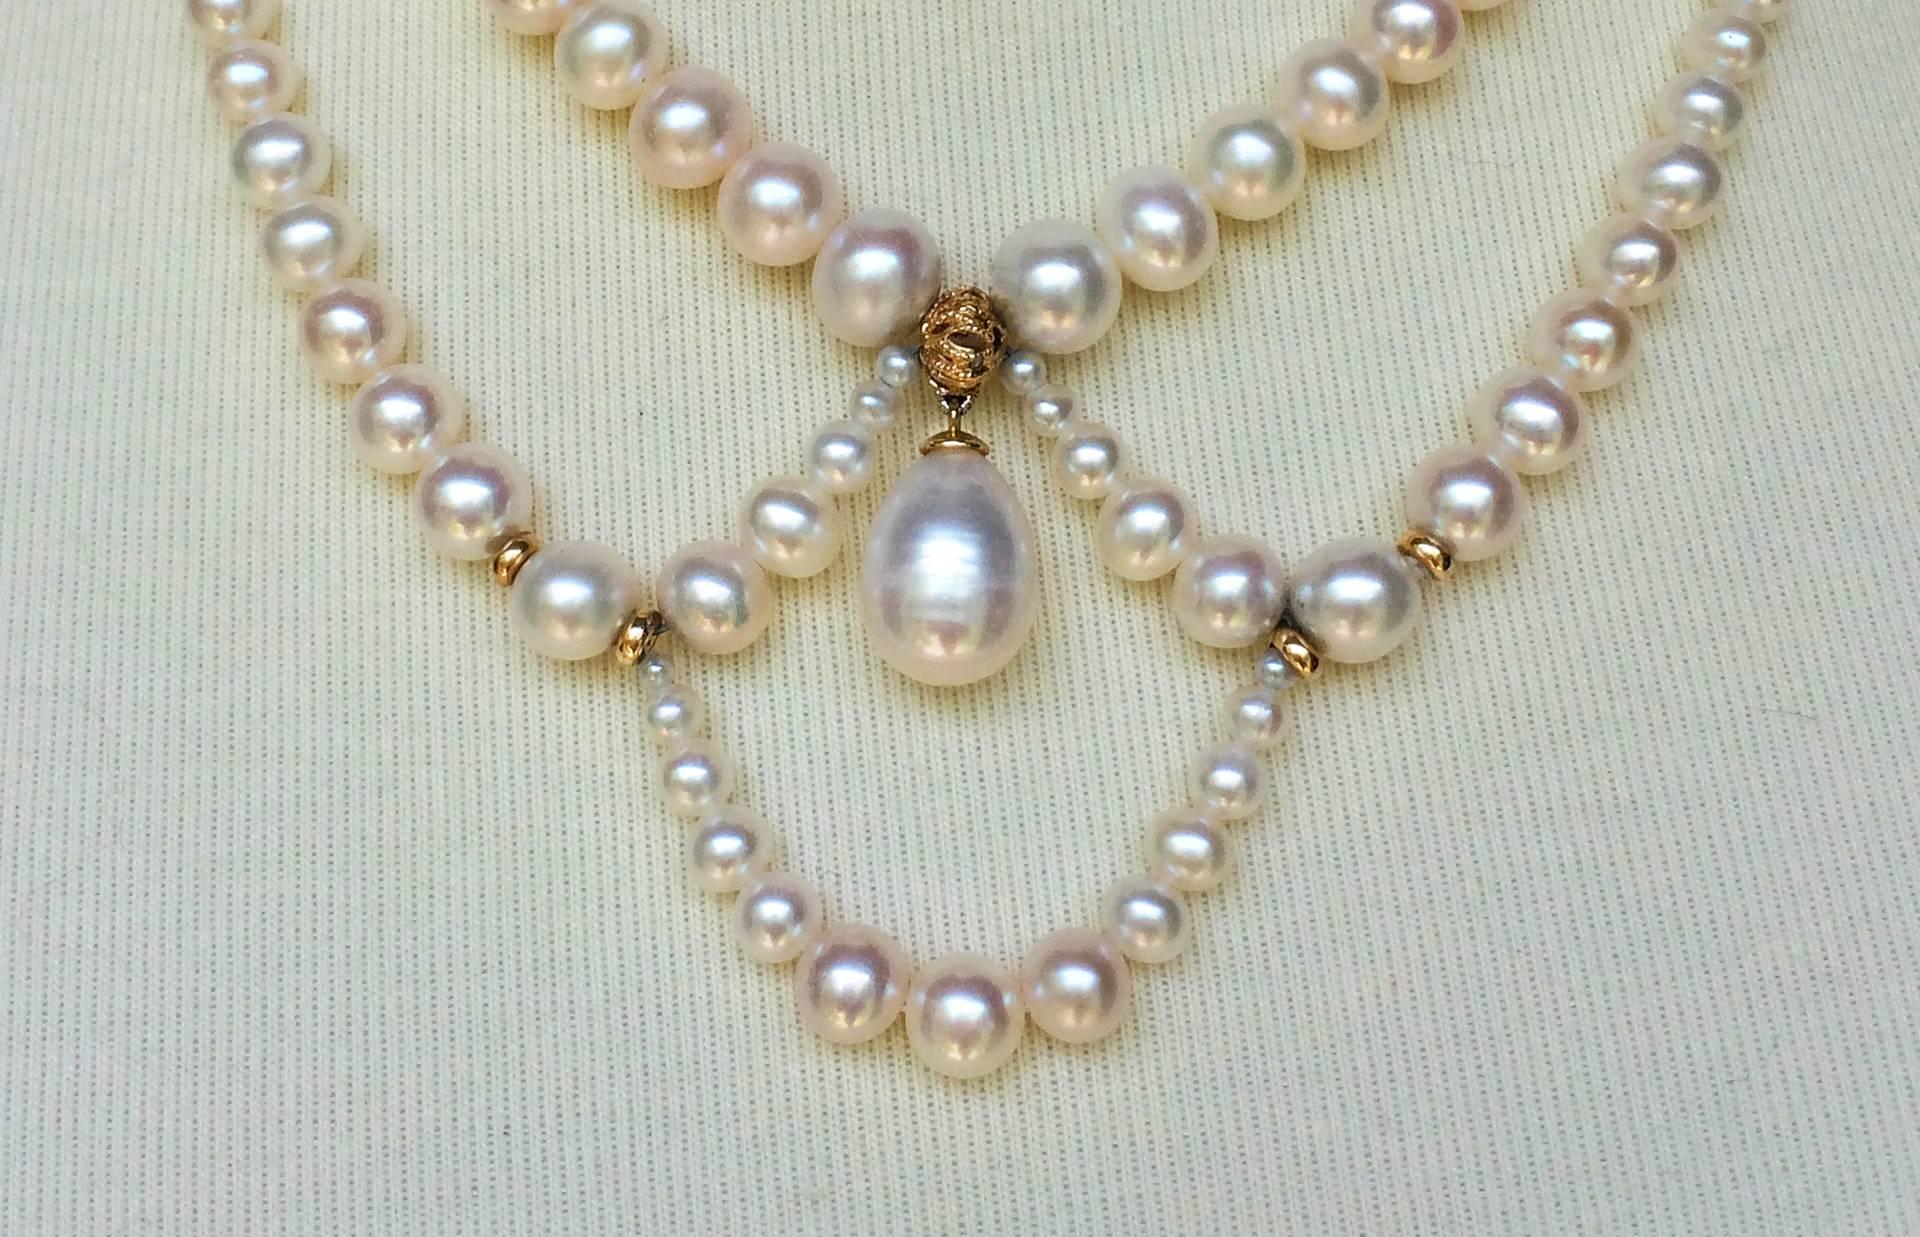 This elegant and timeless pearl necklace has graduated pearls with loops that accentuate the collar bone. At the center is a large tear drop pearl that brings the necklace together. 14k yellow gold beads highlight the pearls in the necklace. The 14k